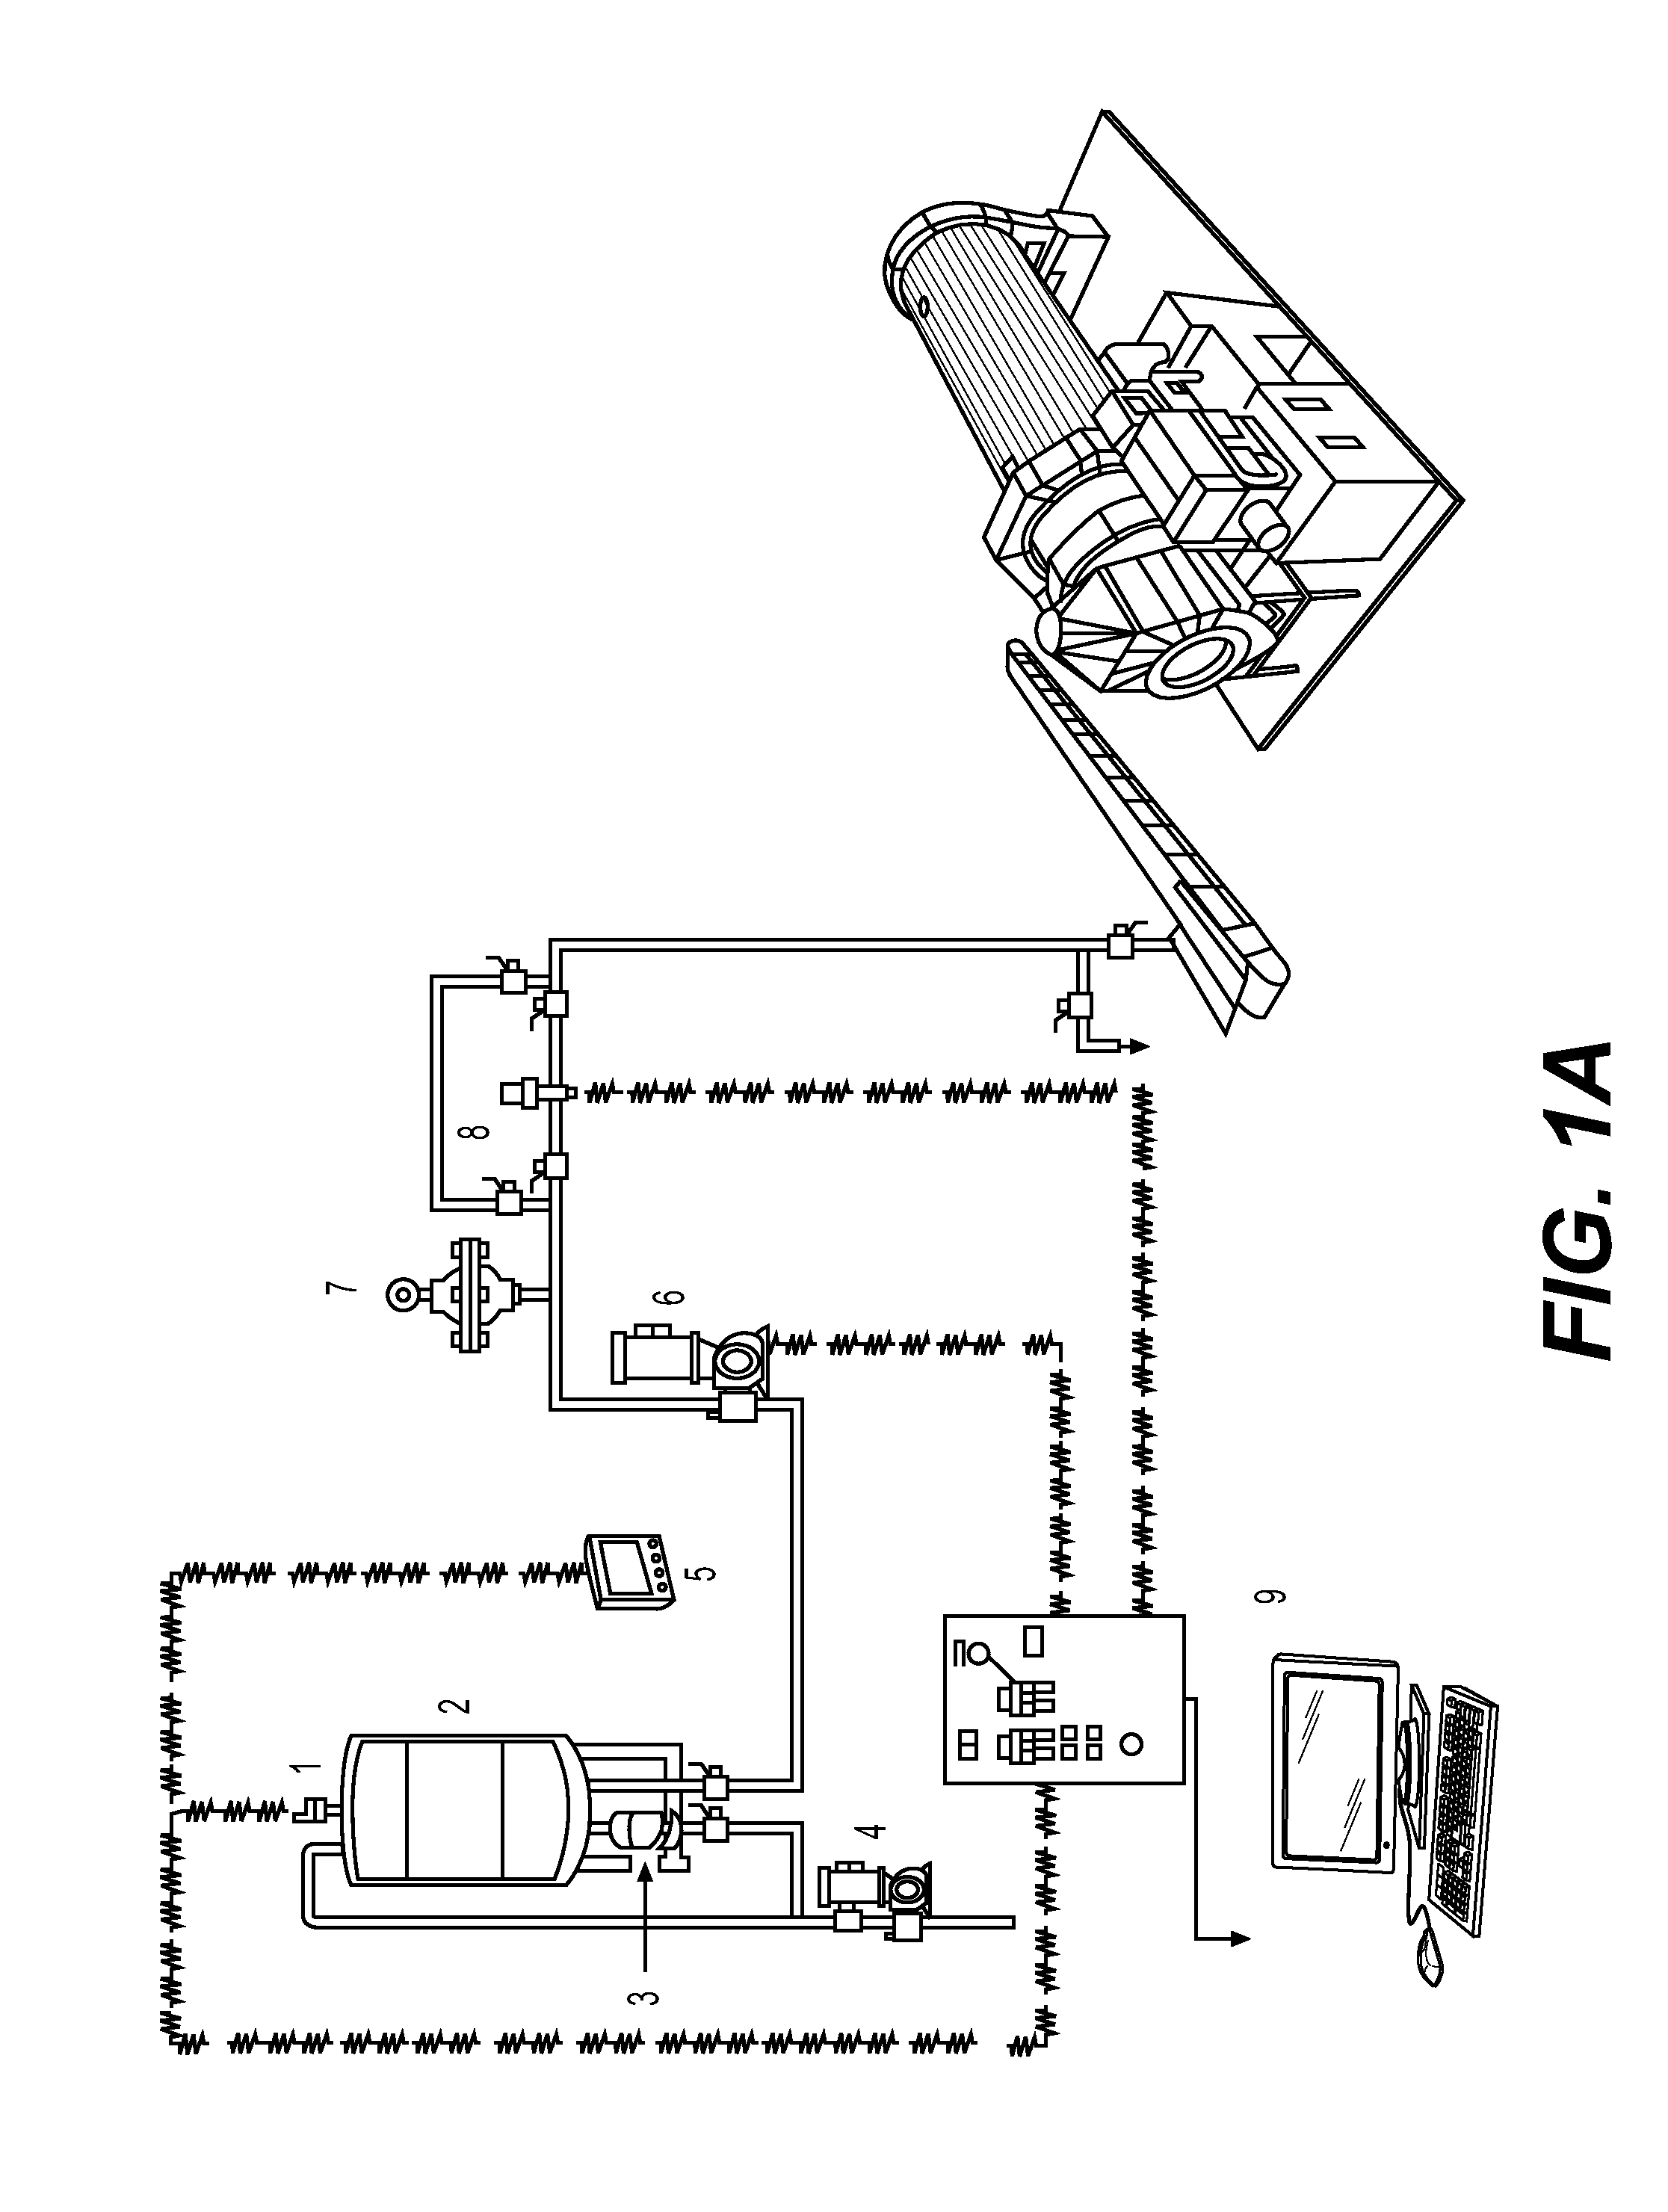 System for the dosing of additives/inhibitors containing magnesium oxide applied to fuels used for the production process of clinker/cement in rotary furnaces and steam generating boilers